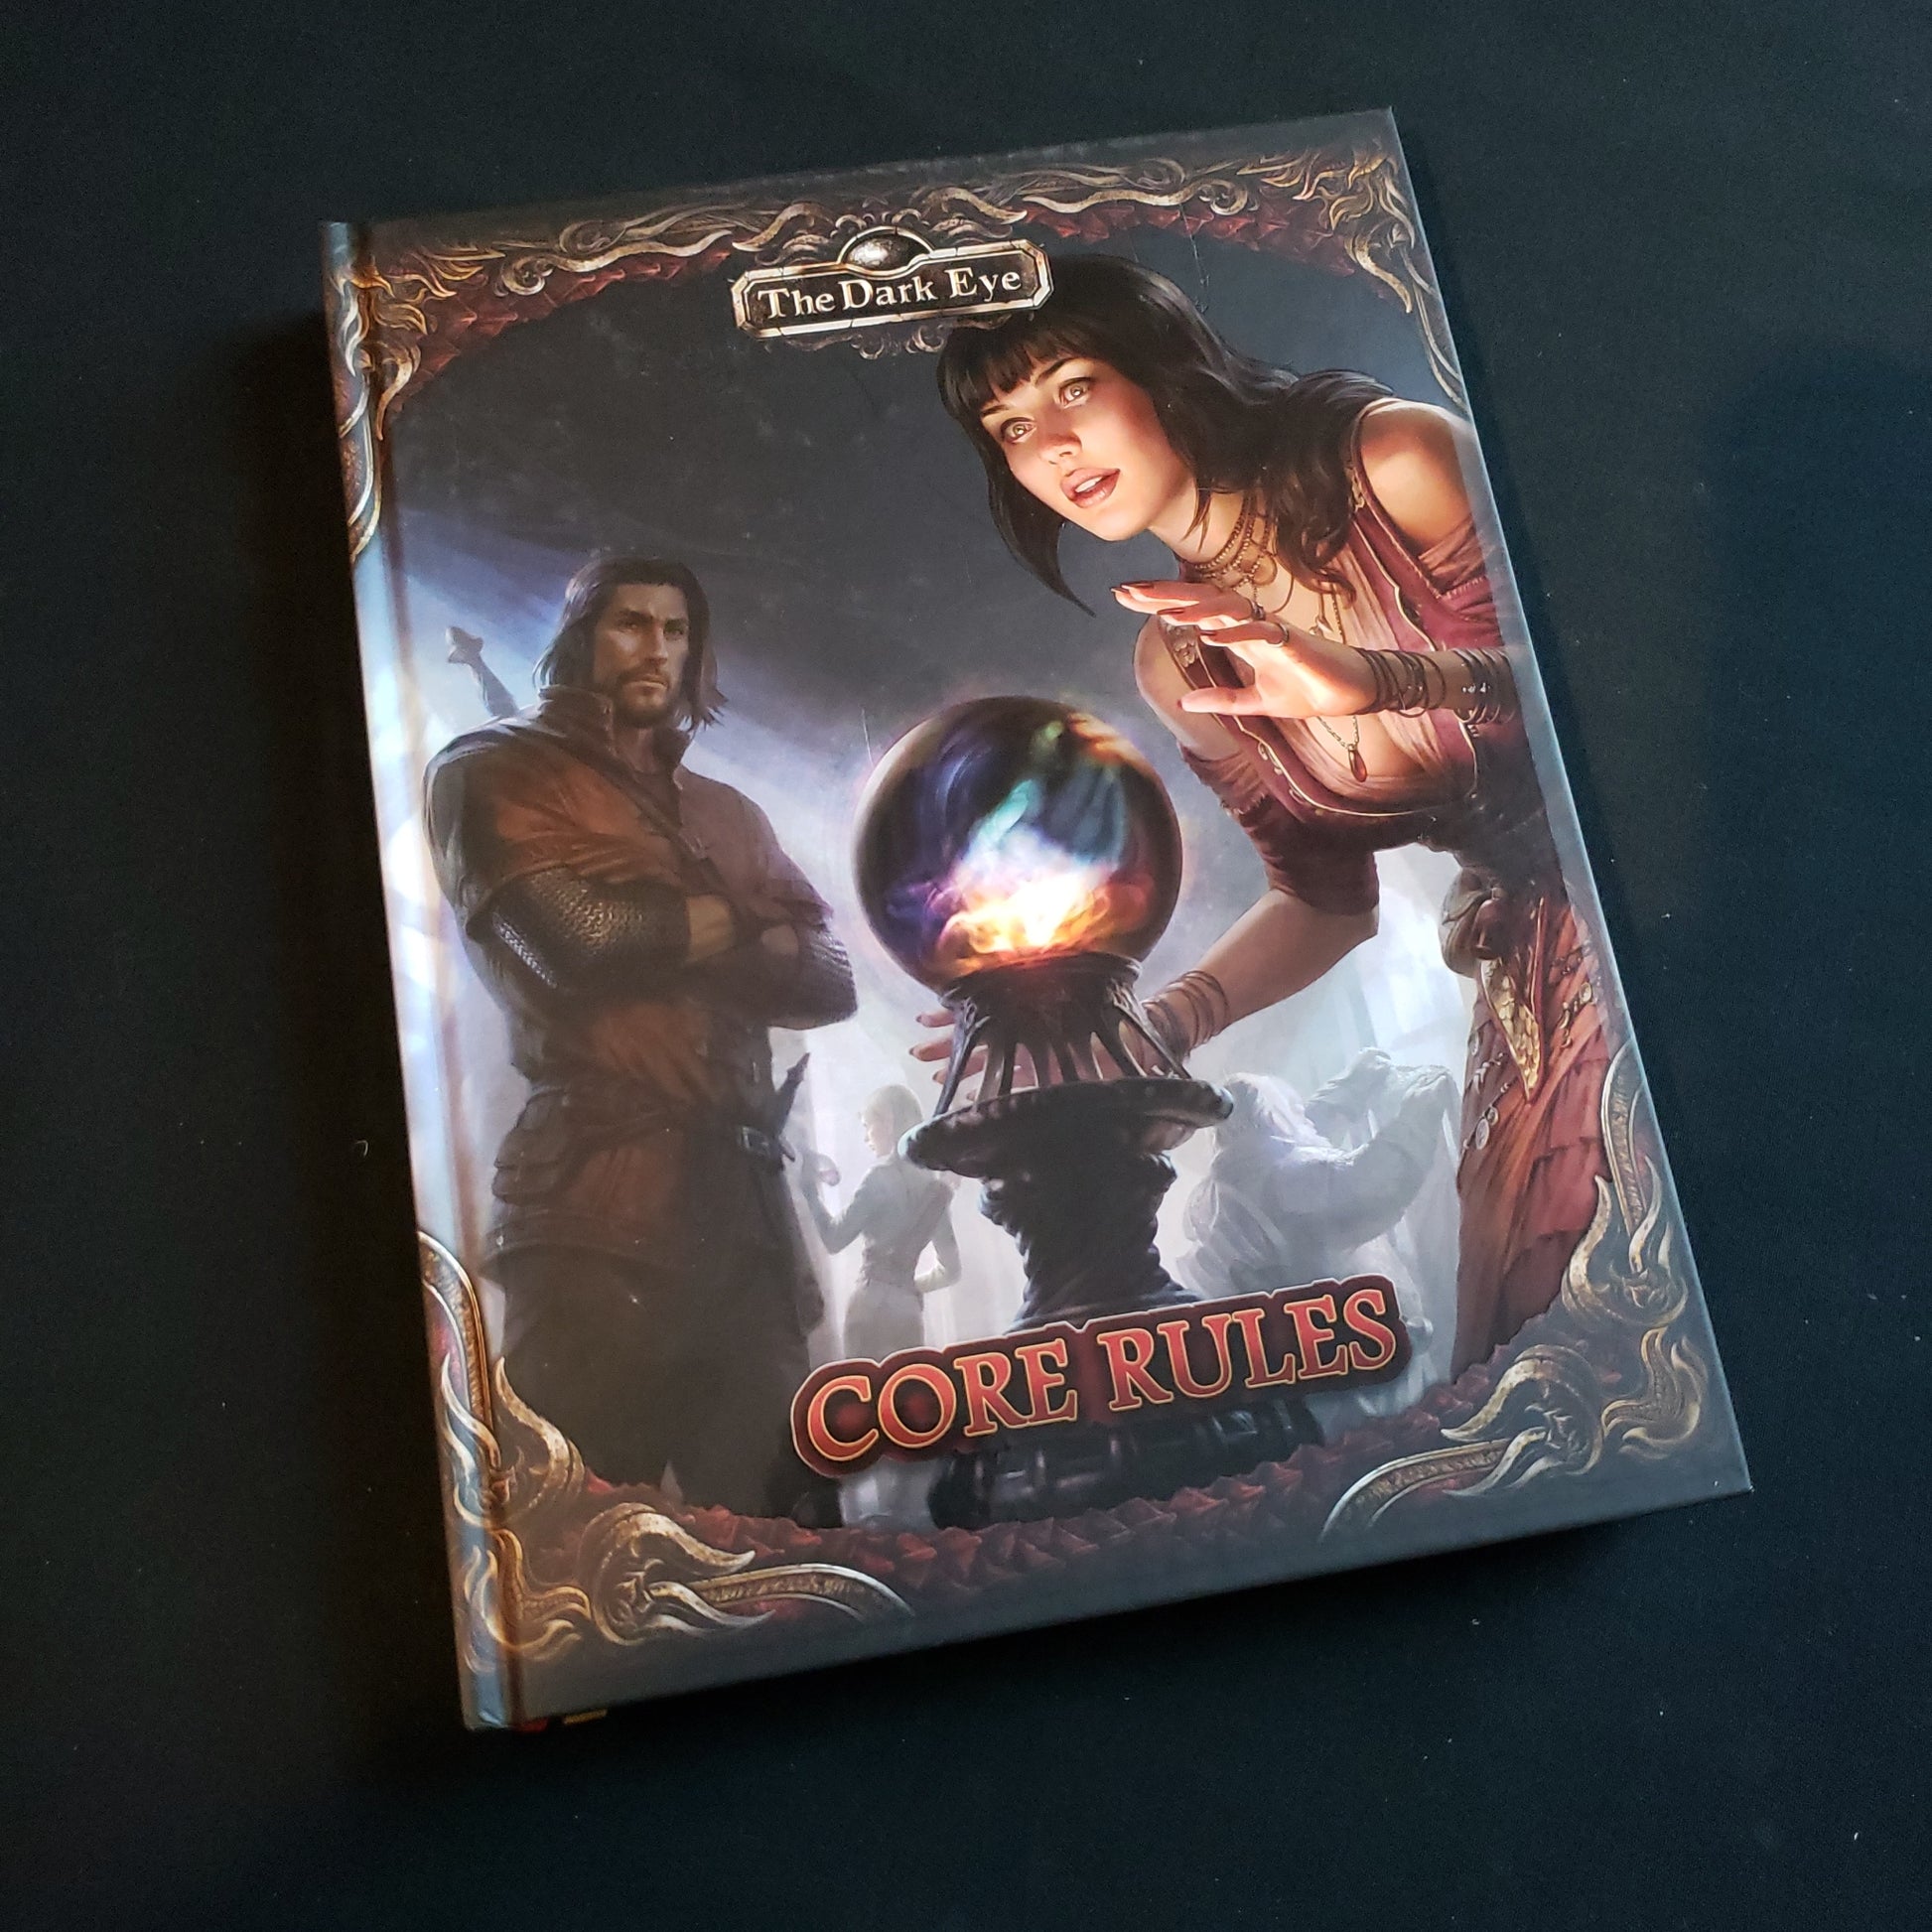 Image shows the front cover of the Core Rules book for the Dark Eye roleplaying game